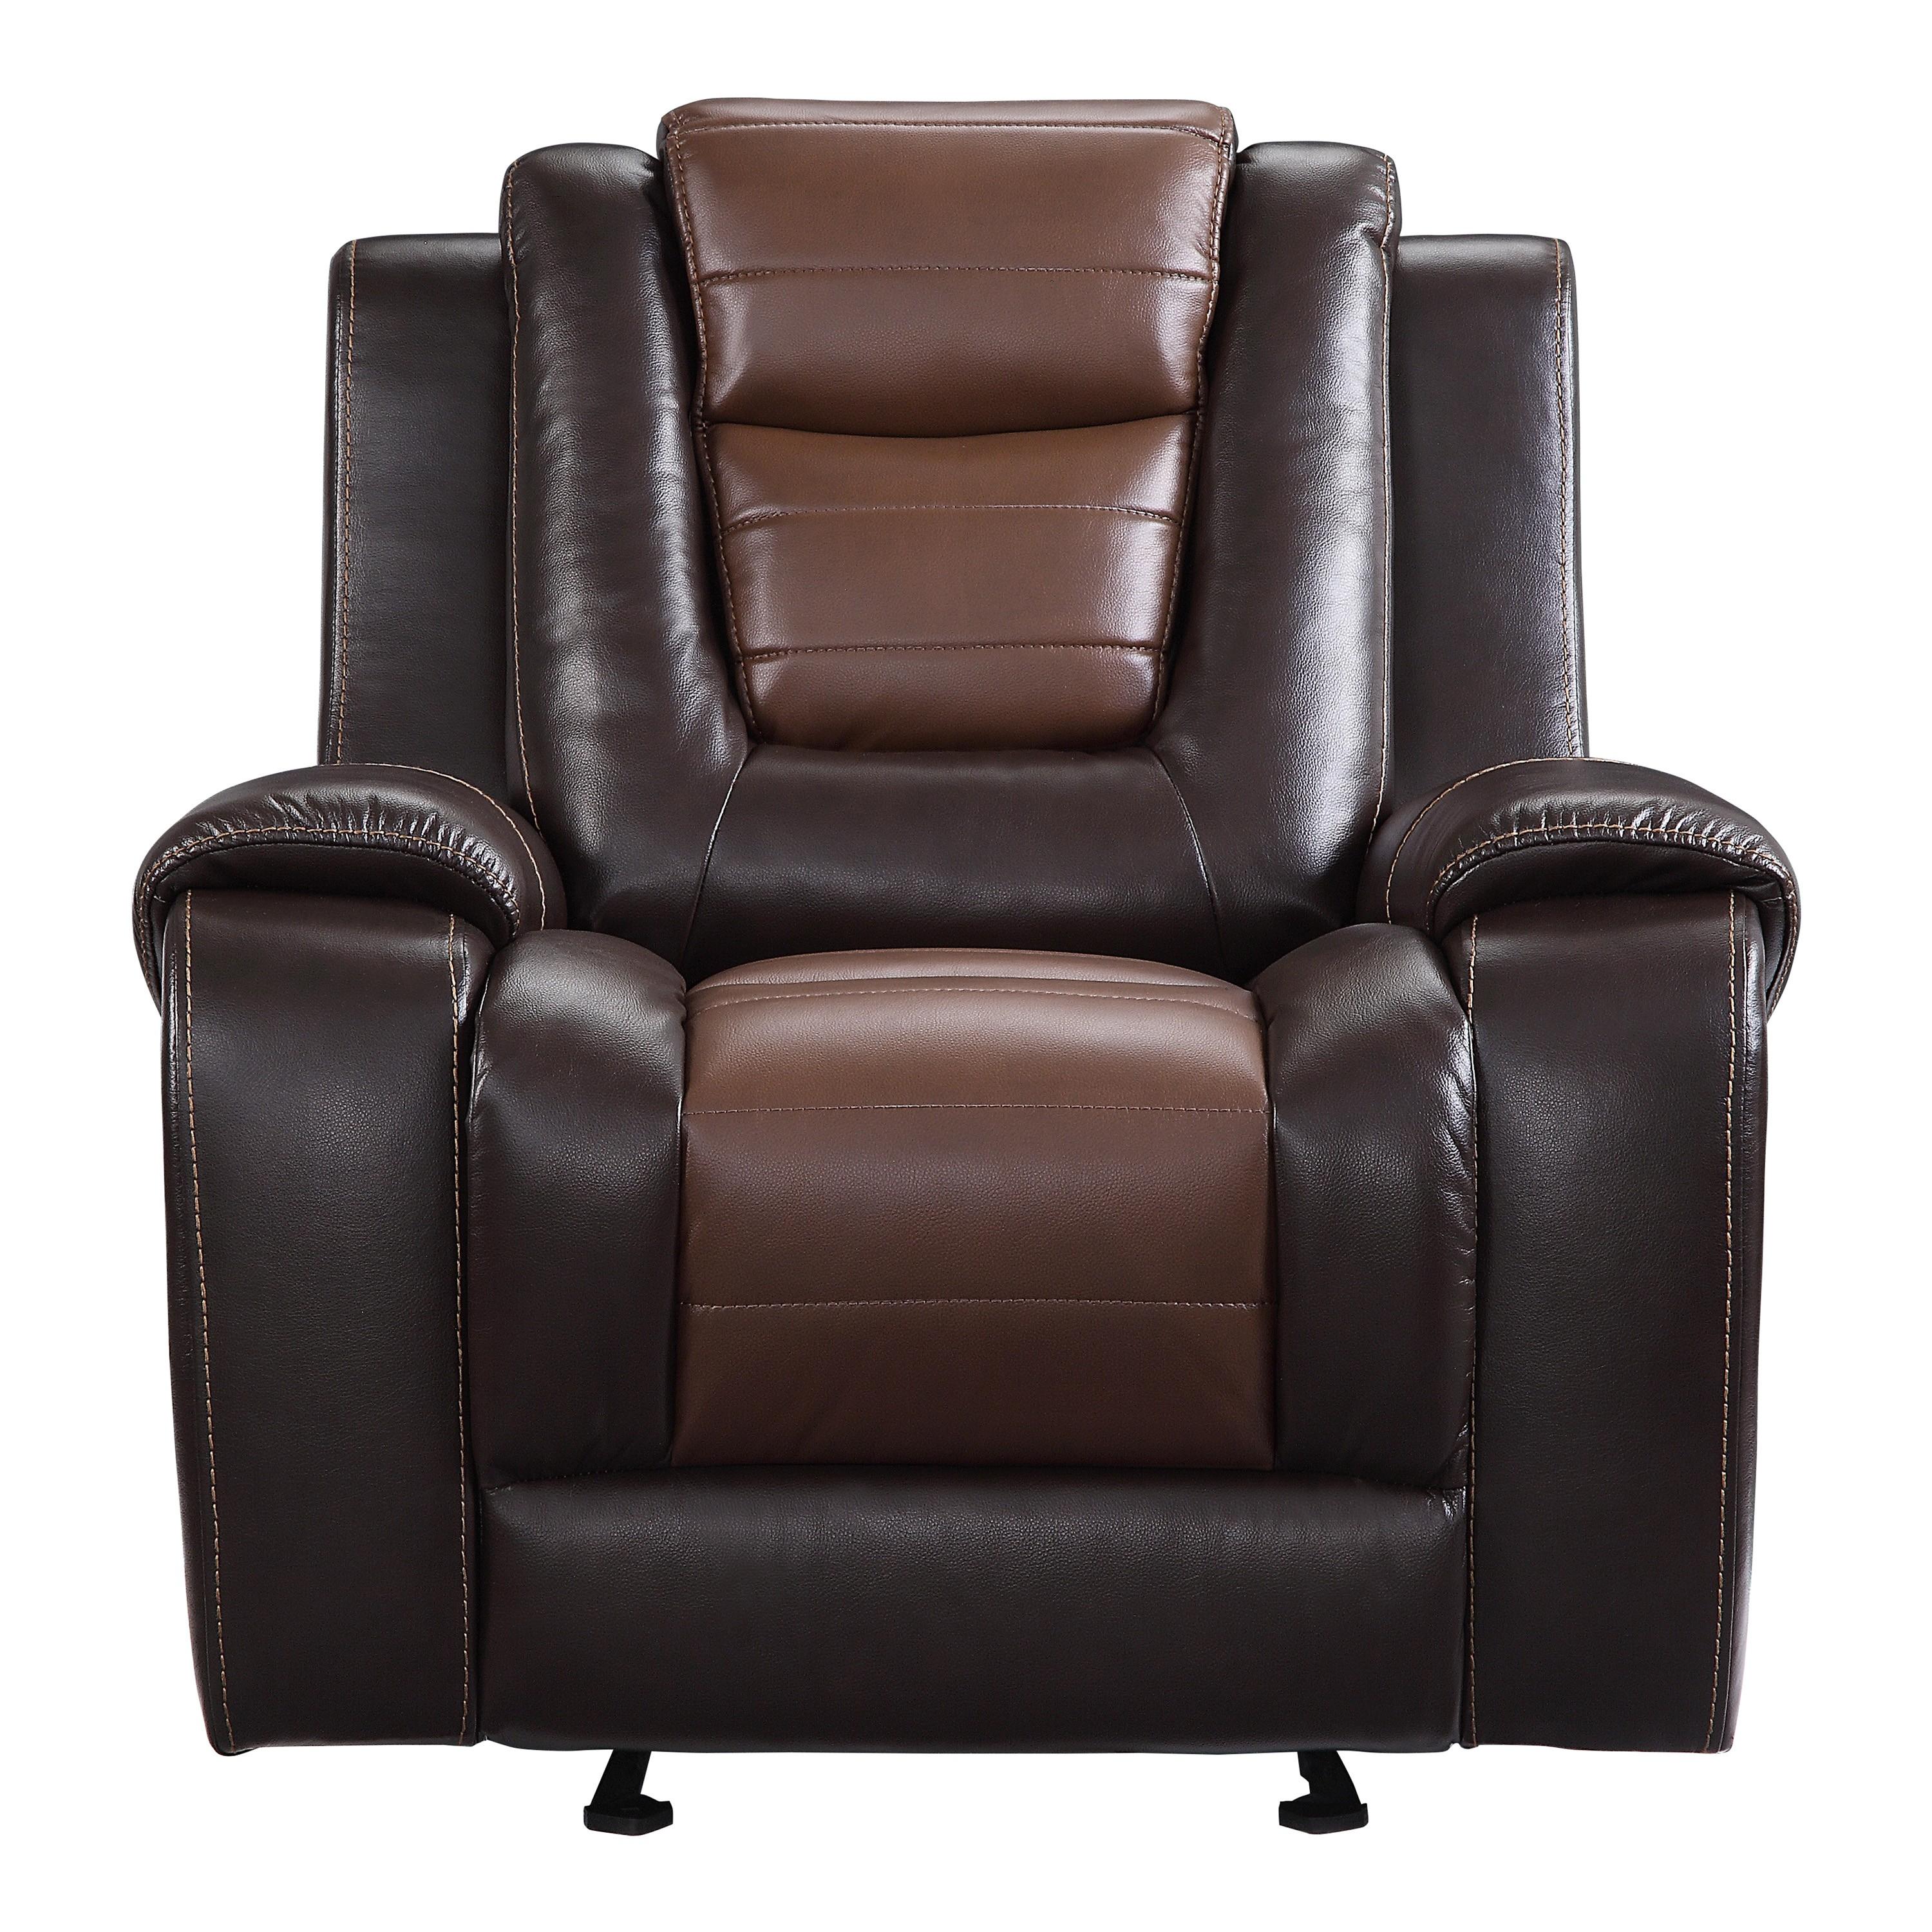 

    
Transitional Dark Brown & Light Brown Faux Leather Reclining Chair Homelegance 9470BR-1 Briscoe
